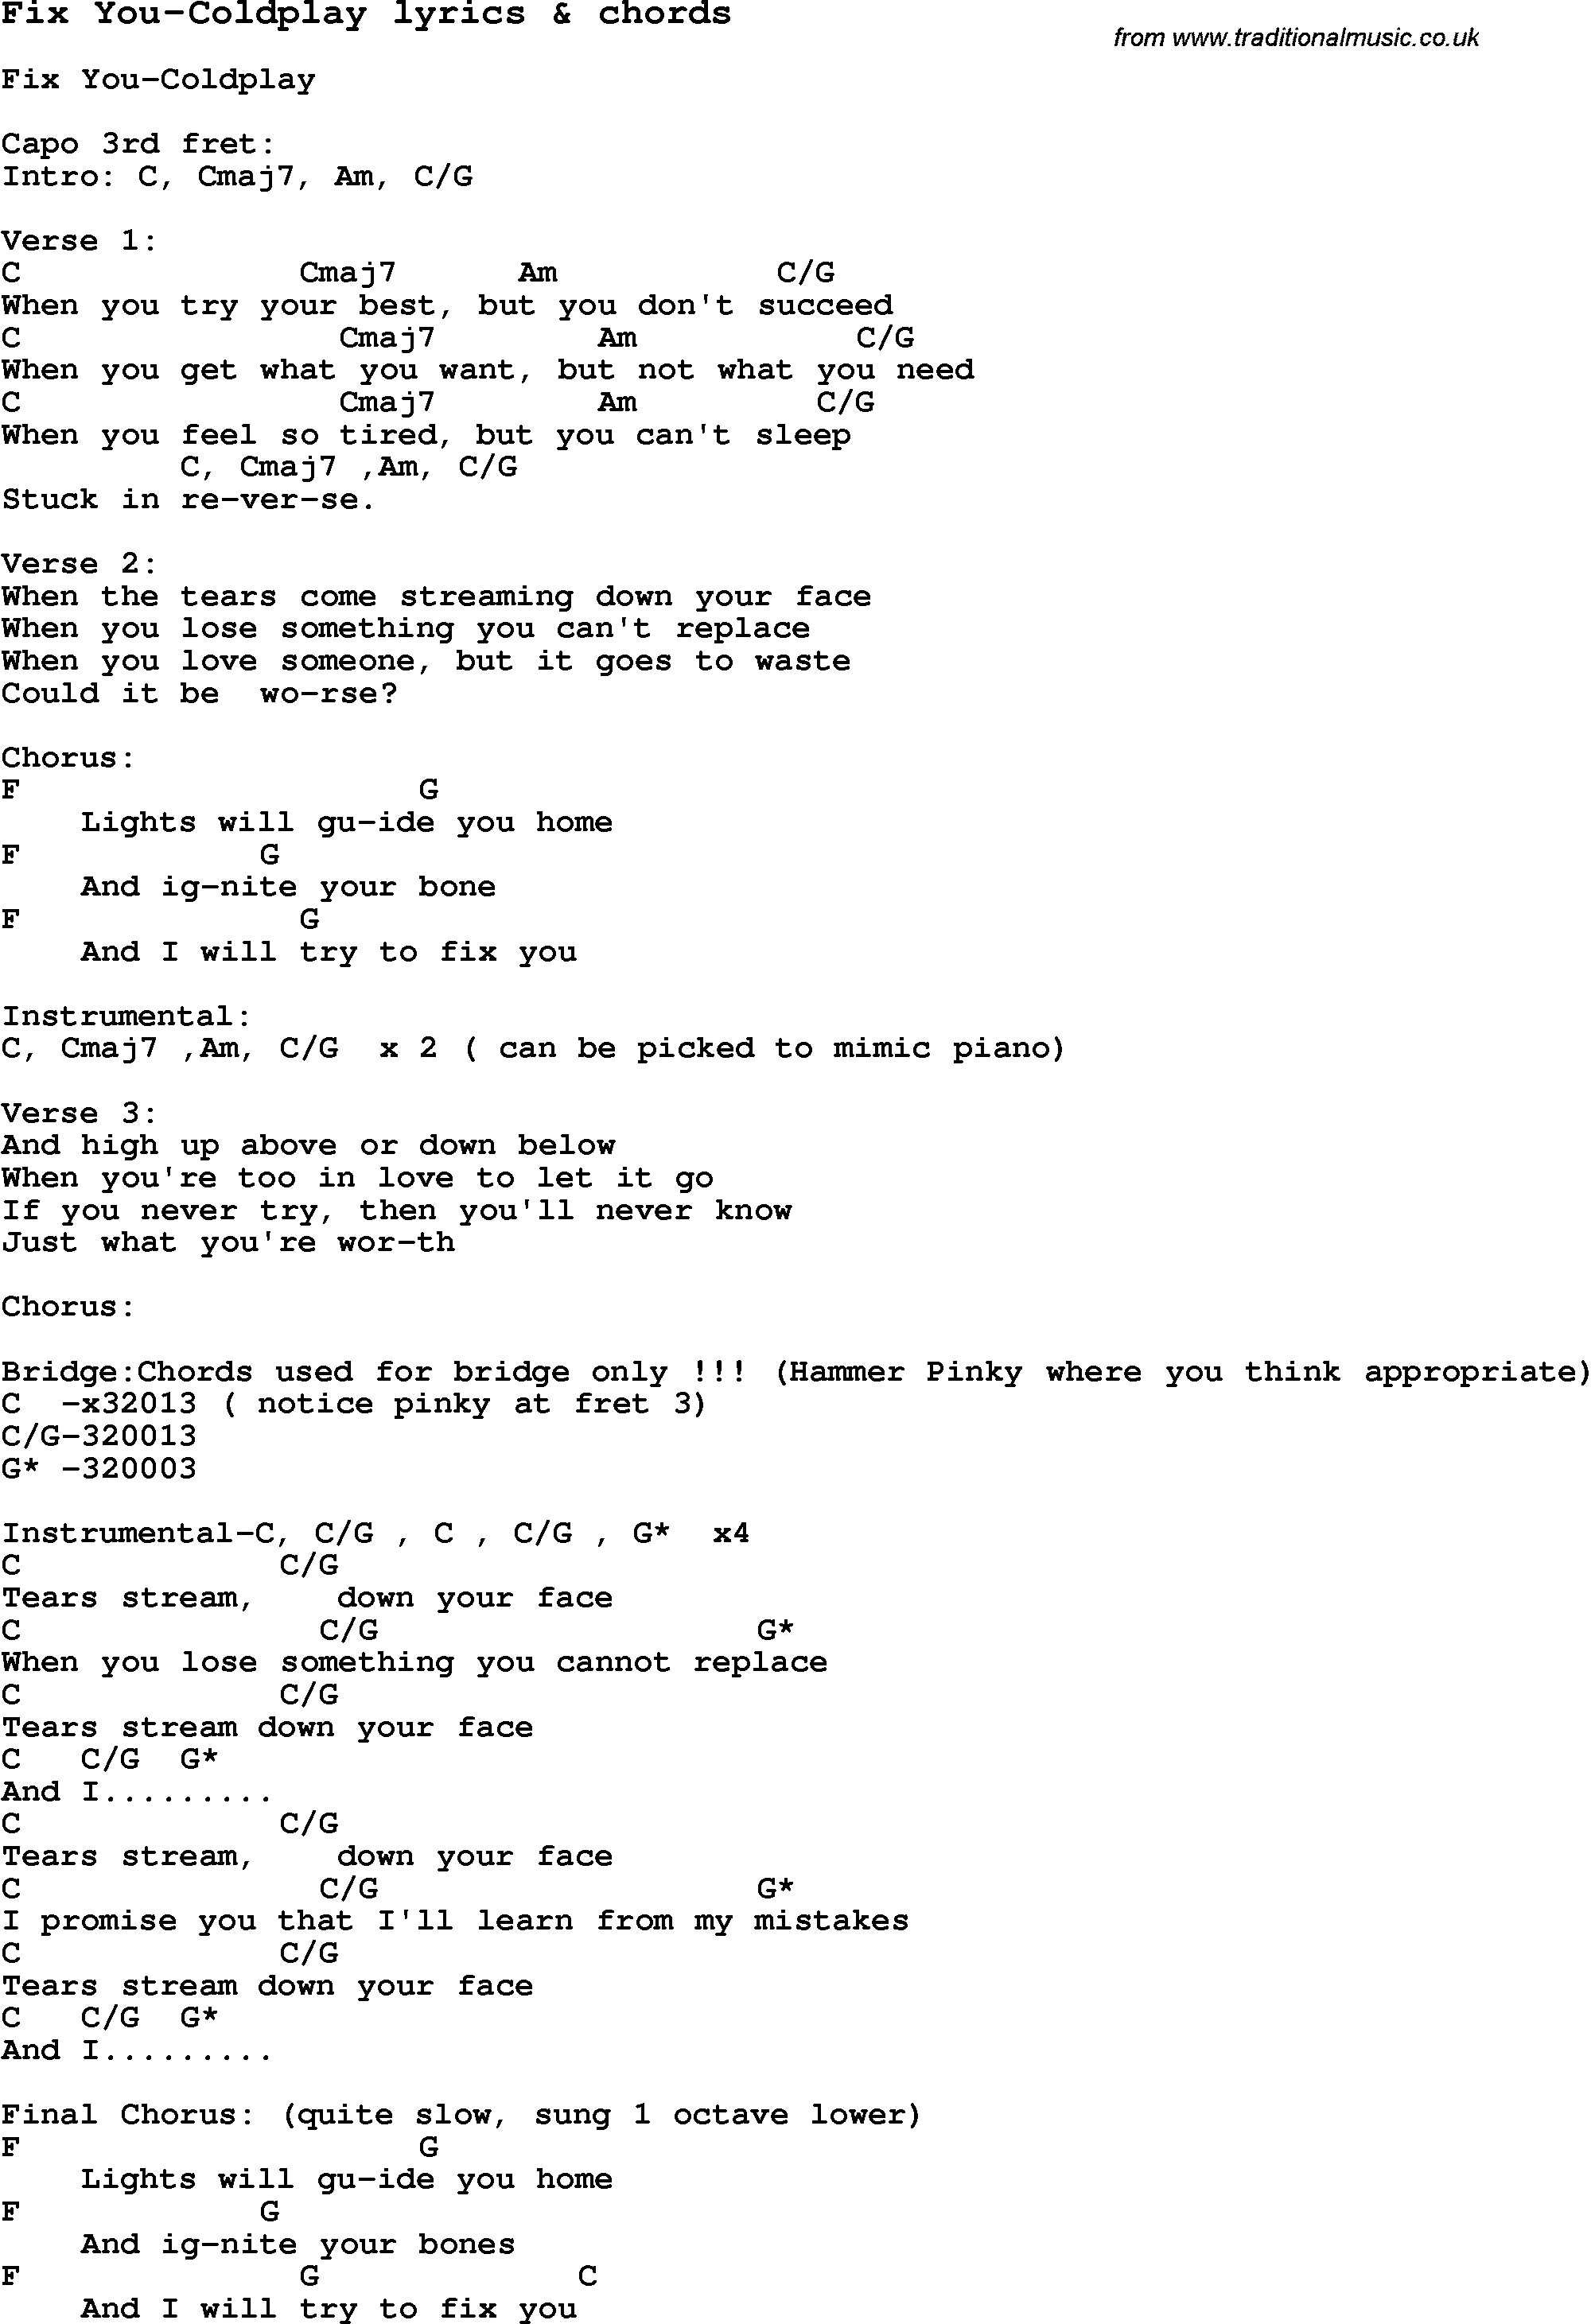 Fix You Chords Love Song Lyrics Forfix You Coldplay With Chords